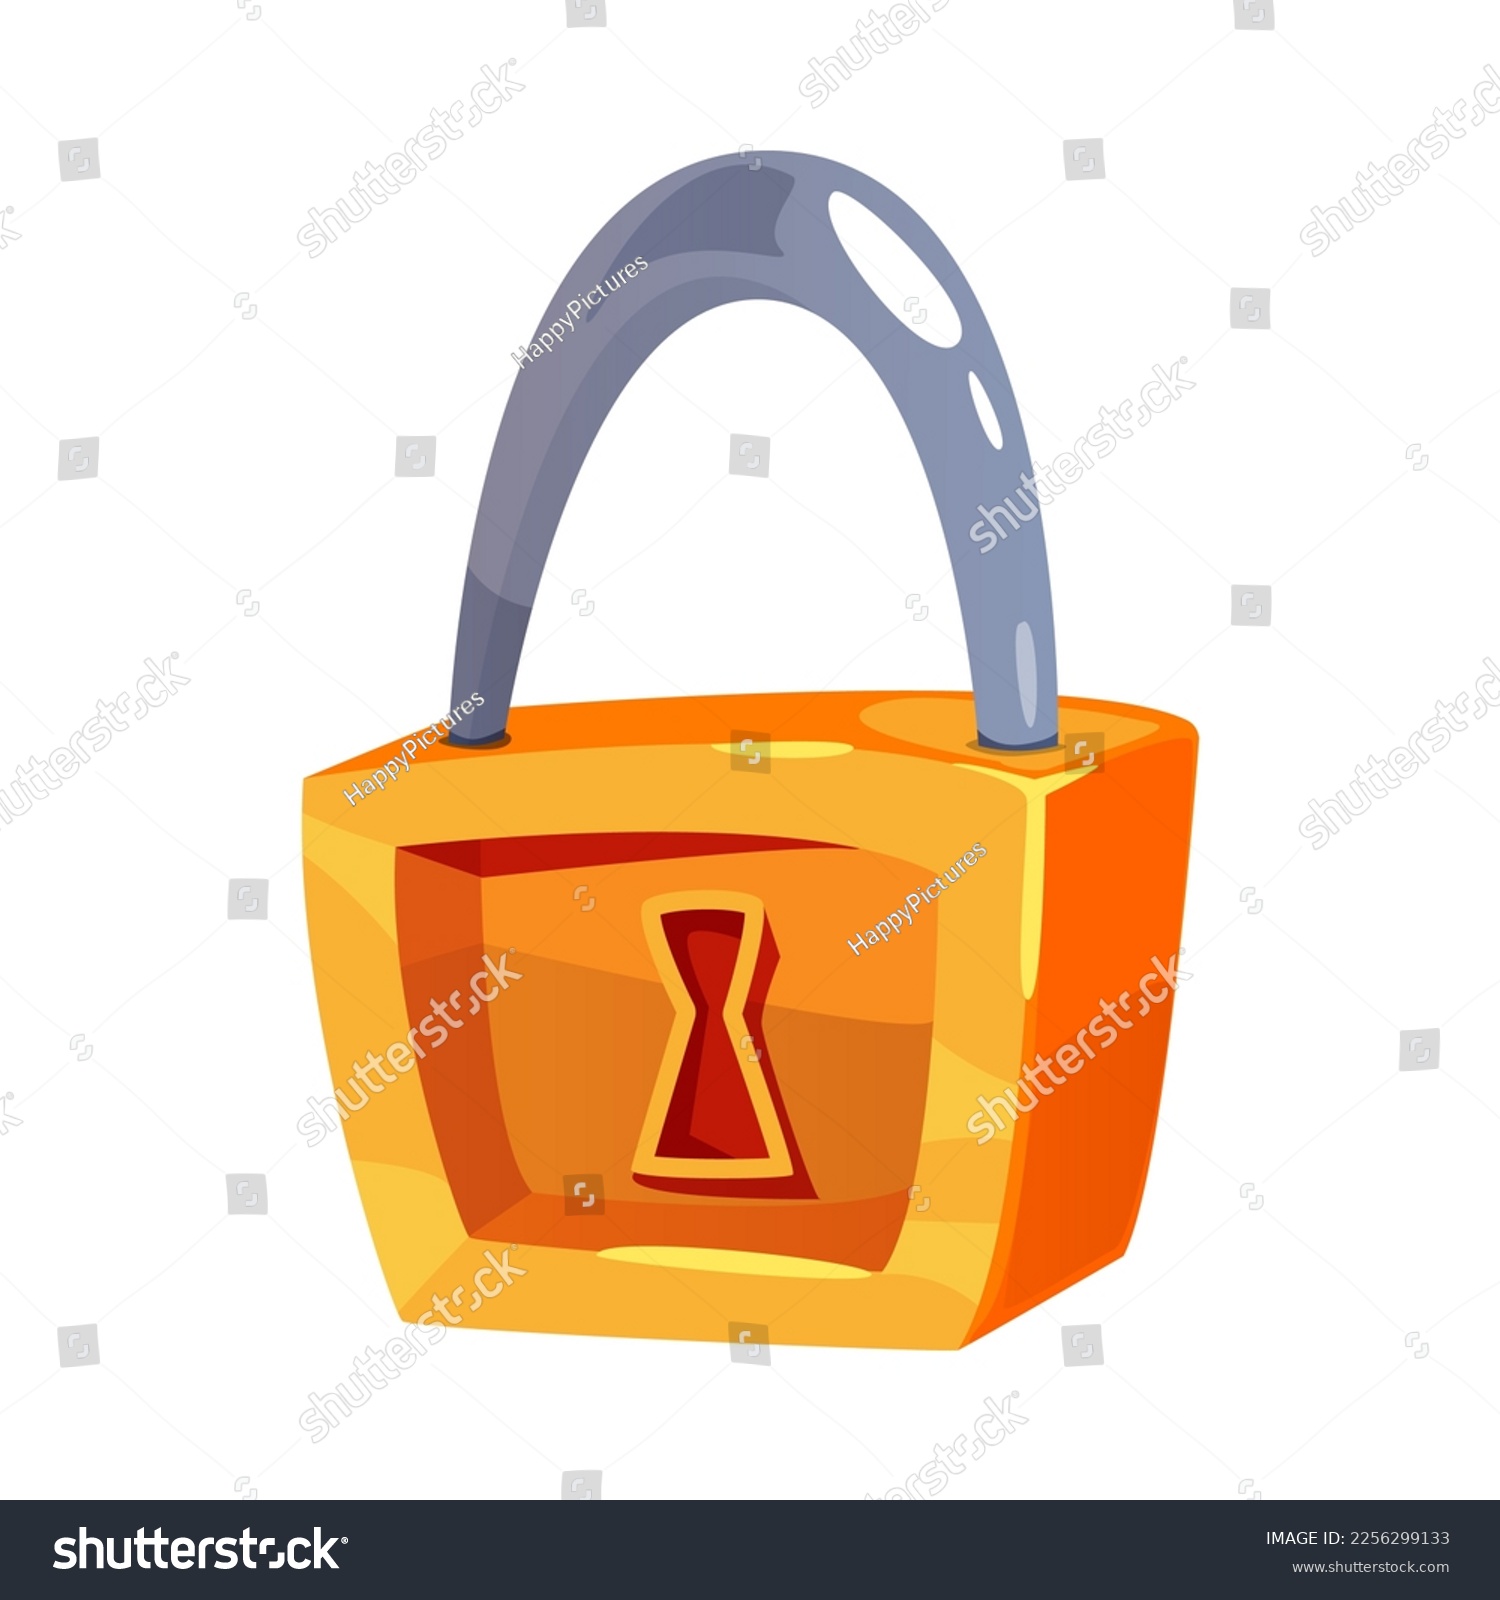 SVG of Golden Padlock with Key Hole as Game Object Vector Illustration svg